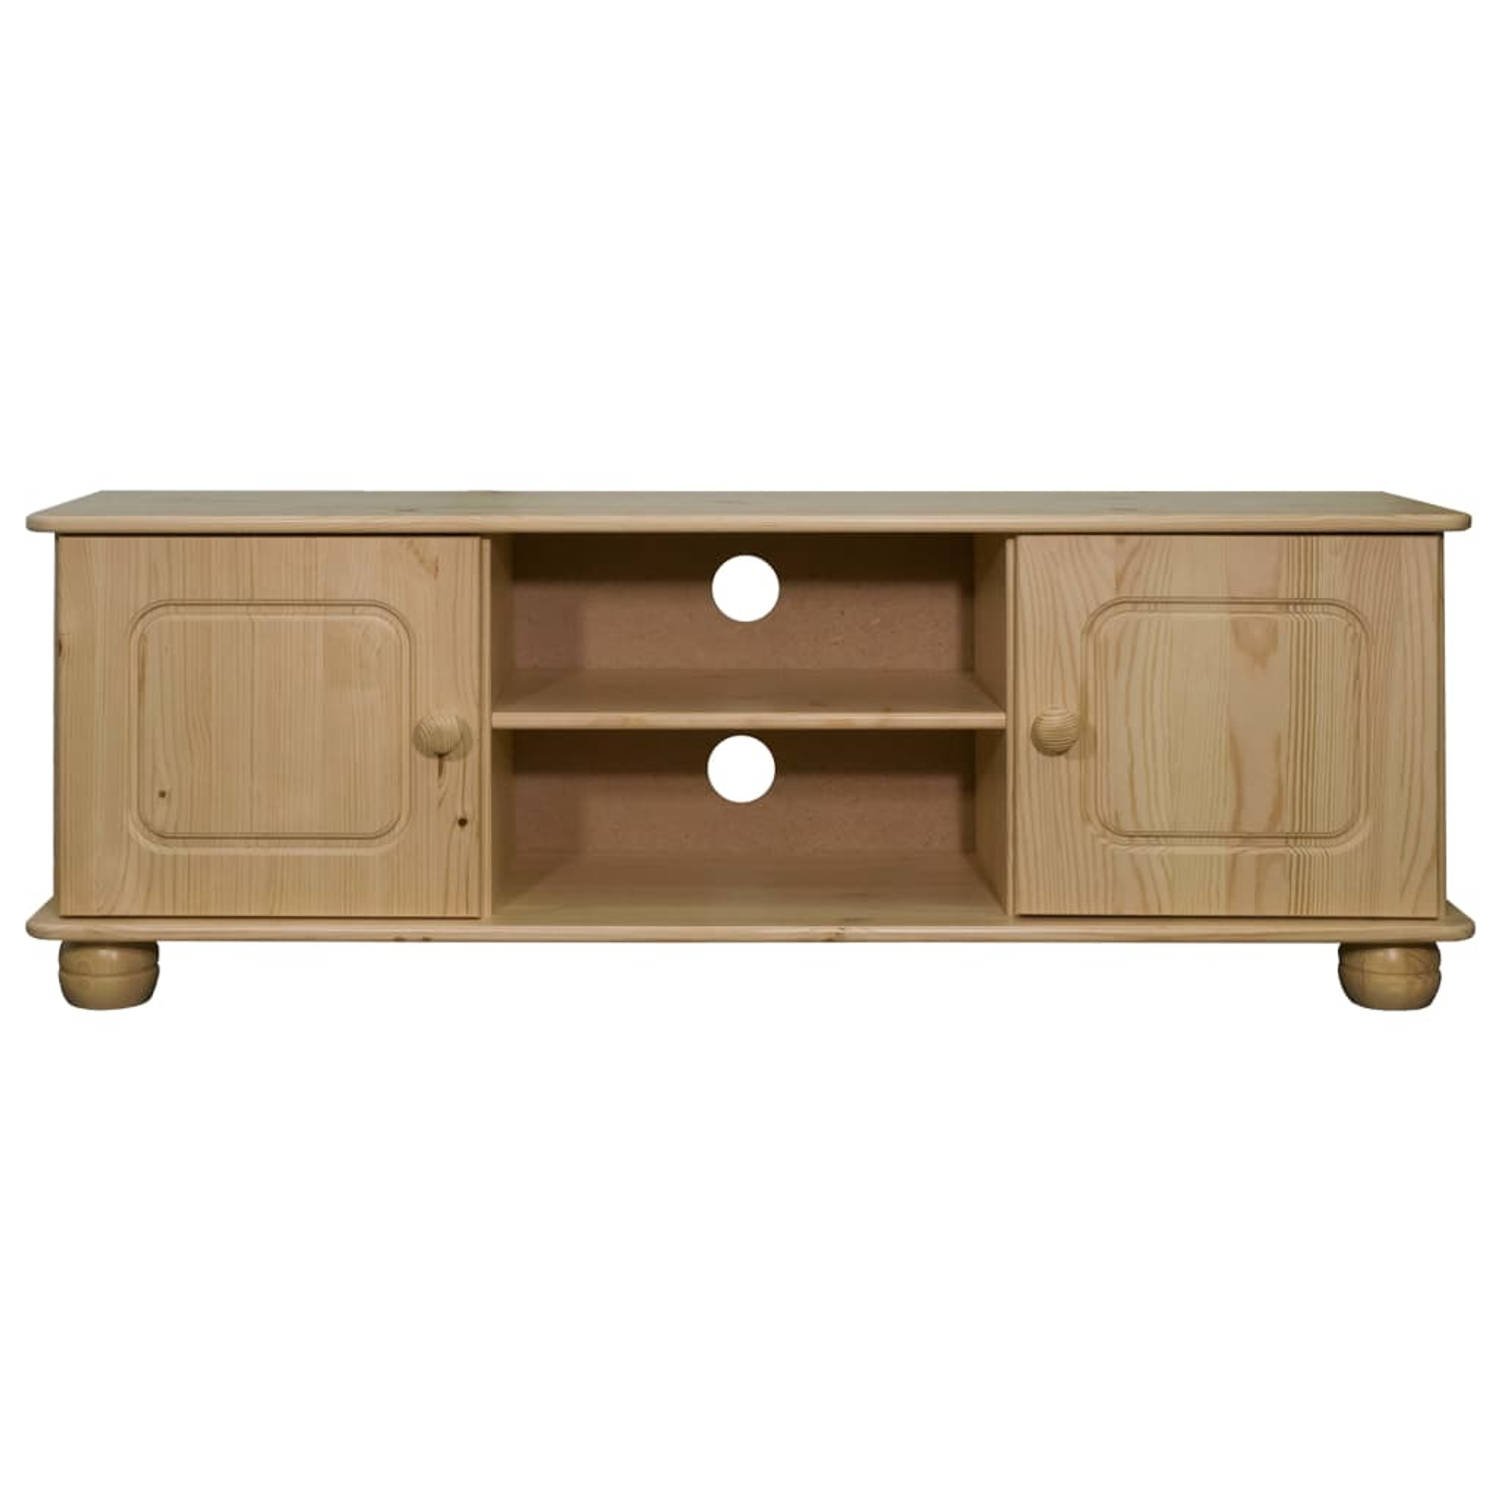 The Living Store Stereokast Hout TV-meubel 115 x 29 x 40 cm Massief grenenhout